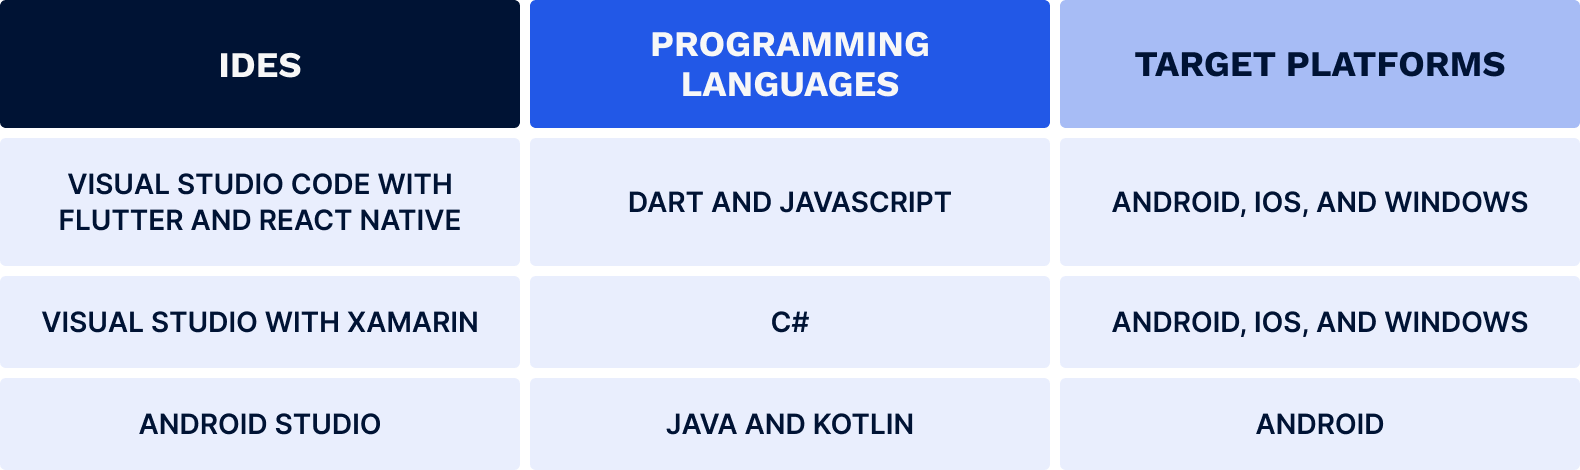 Android programming languages and platforms